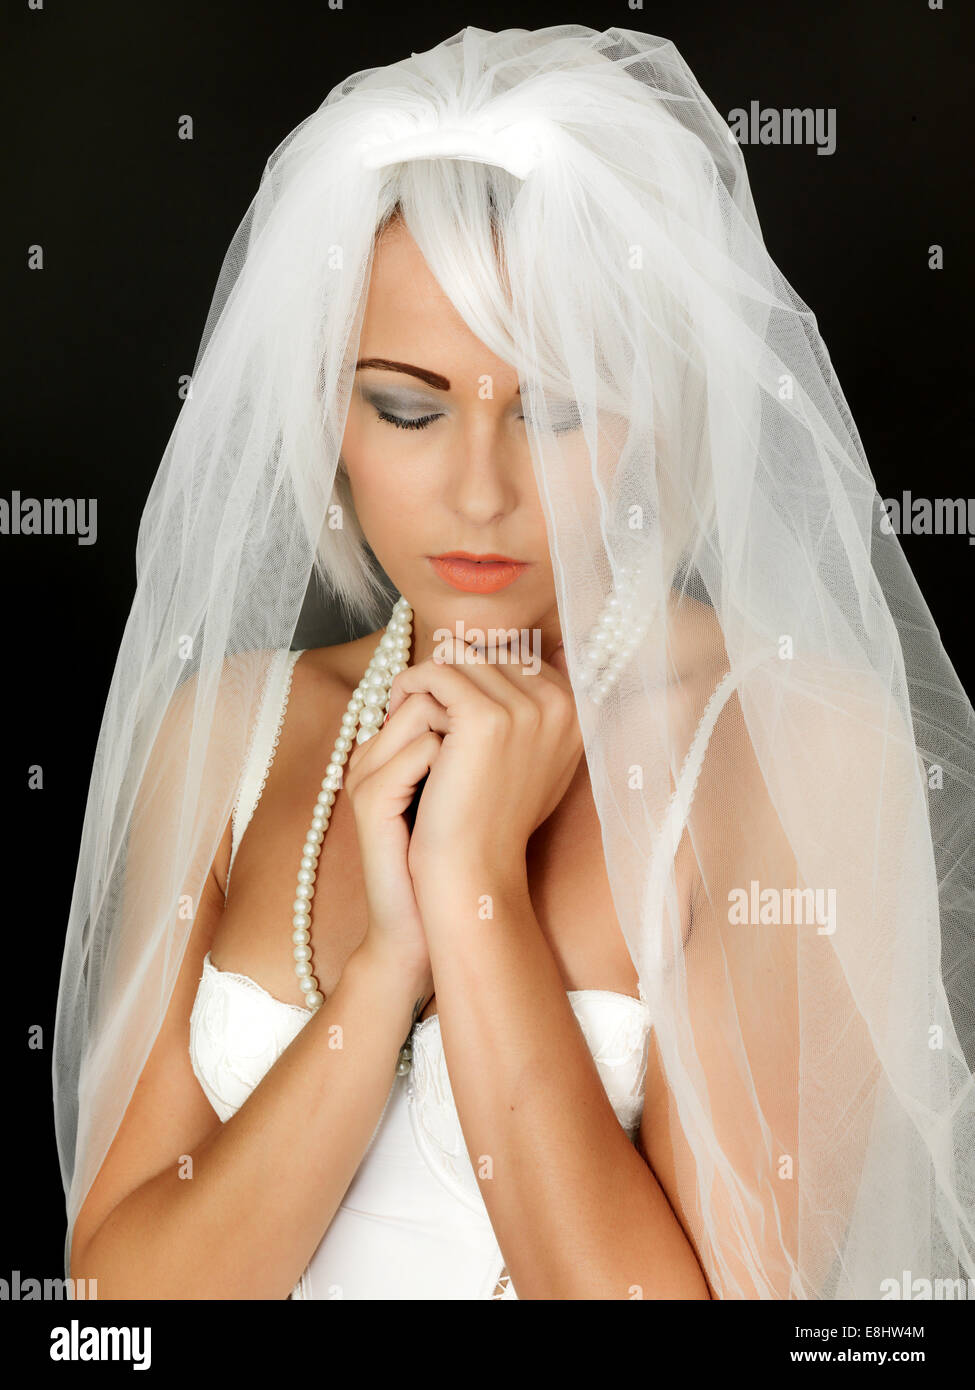 Young Woman Bride To Be Wearing A White Wedding Veil Anticipating A New Life And Beginning In A Life Partnership Isolated Against A Black Background Stock Photo